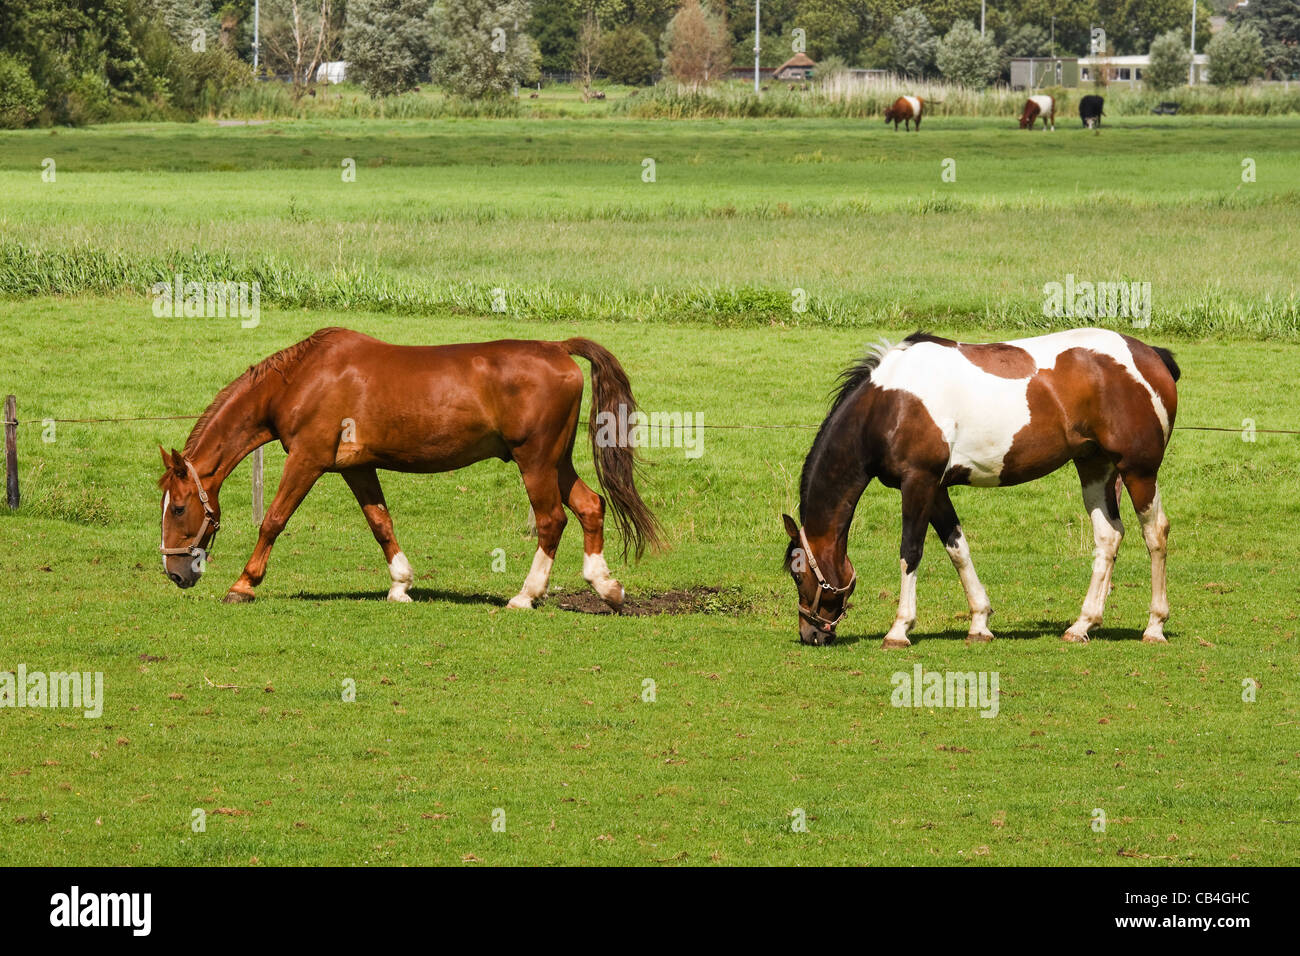 Two horses on sunny summerday in the country grazing on grassland with cows in background Stock Photo